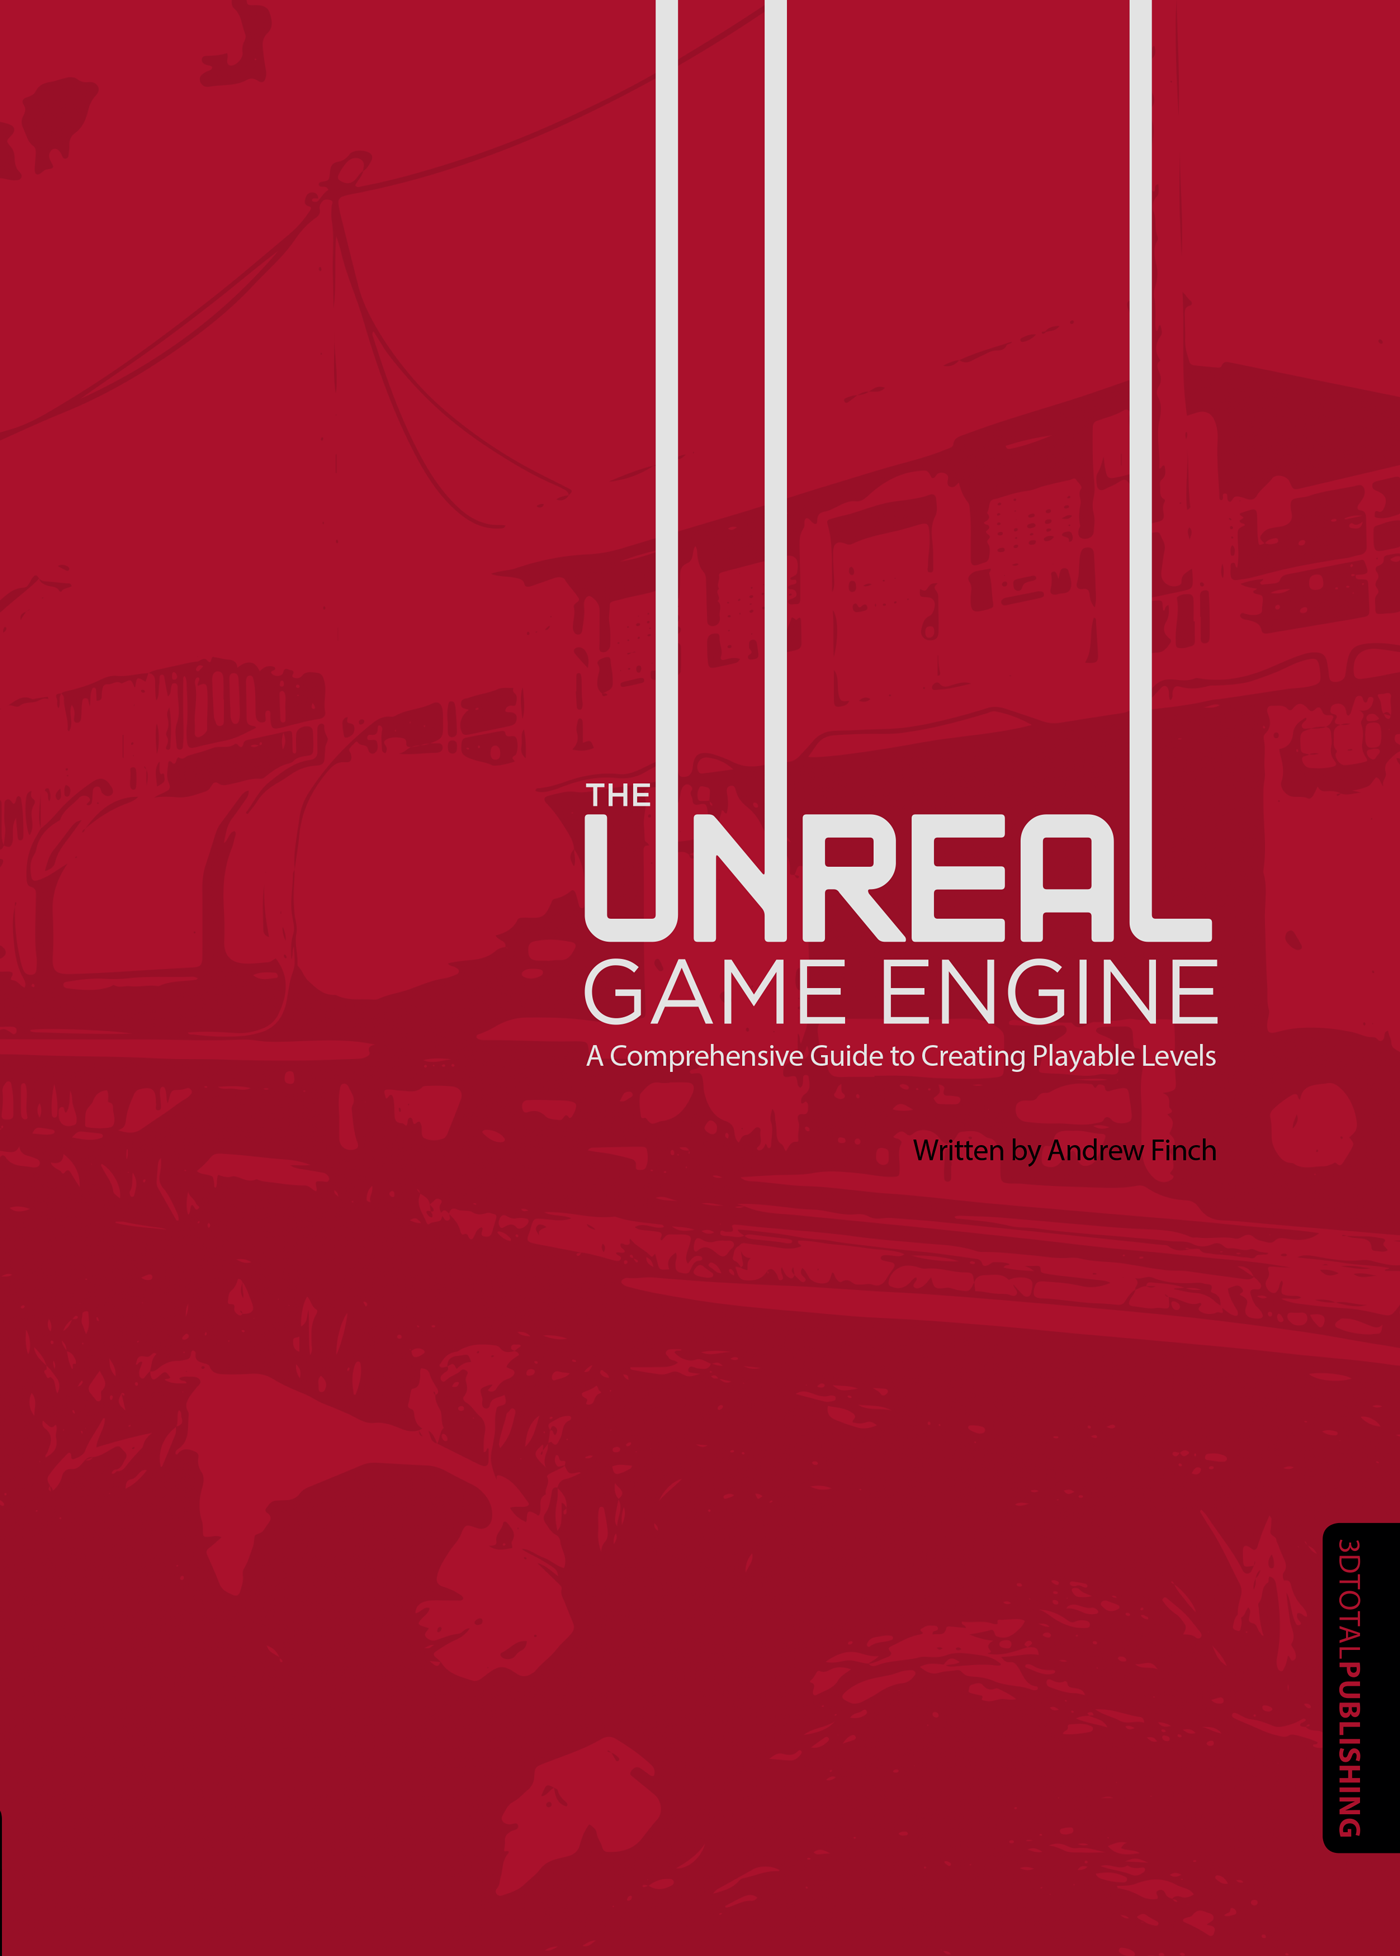 Red cover of 'The Unreal Game Engine', showing a red-tinted image of a train station, with the title in large white lettering